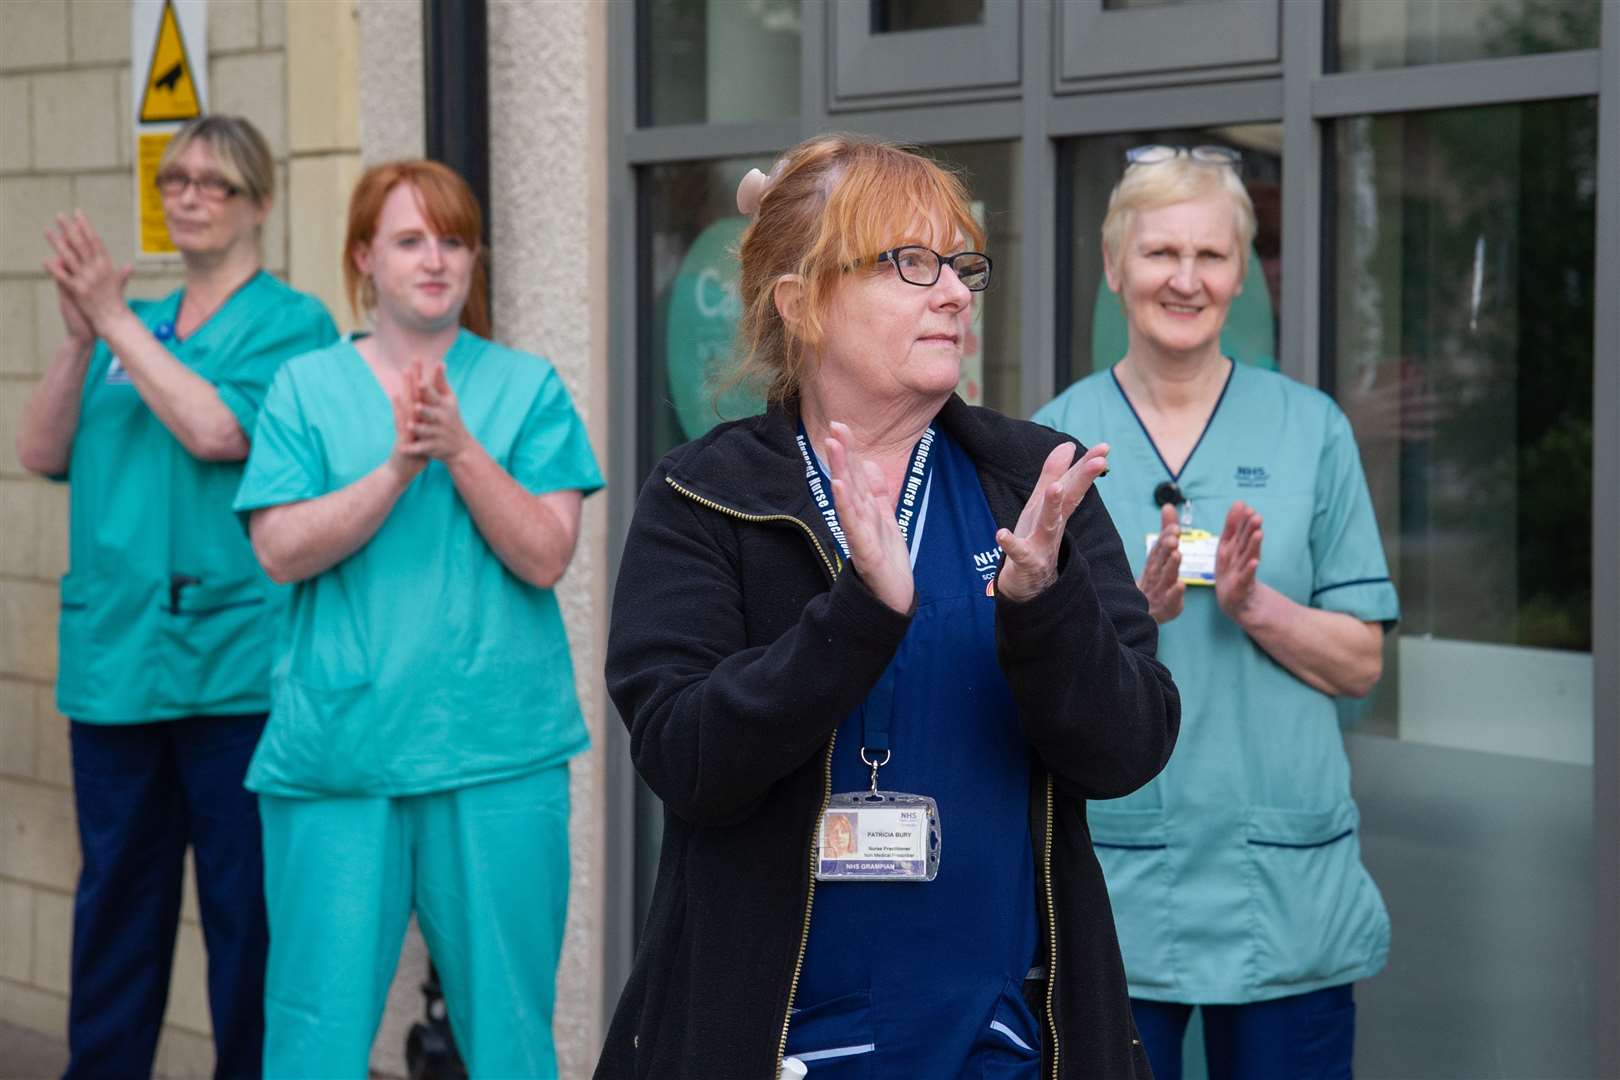 NHS workers at Dr Gray's Hospital join in with Thursday's 8pm nationwide applause for their fellow key workers during the coronavirus pandemic. ..Picture: Daniel Forsyth..